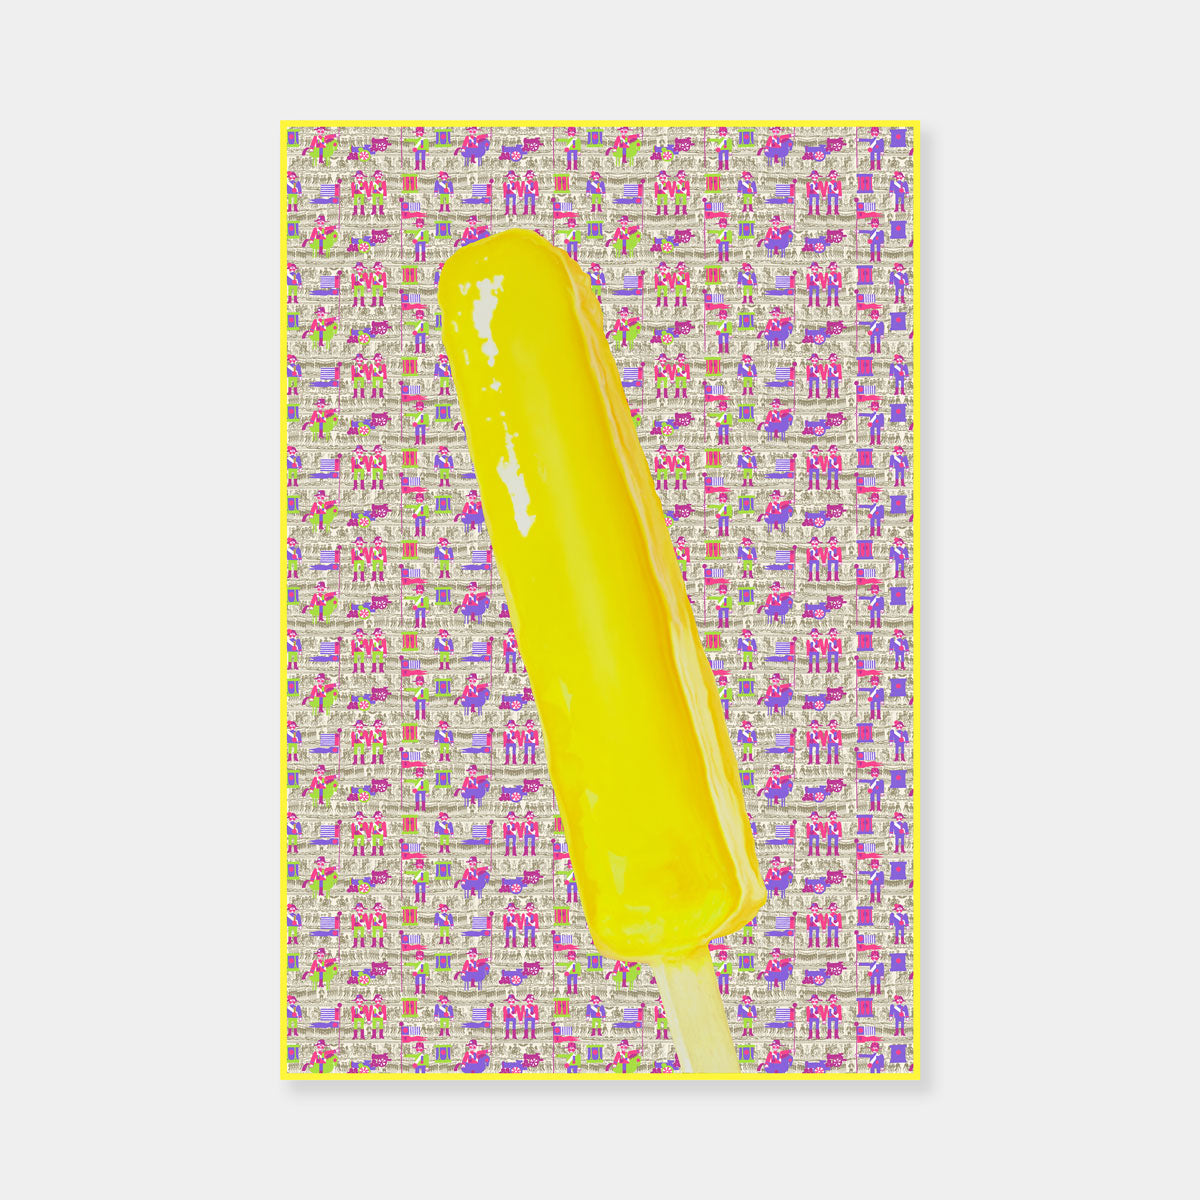 Artsuite - Jack Early Limited Edition Multiple - Yellow - Limited Edition Print - 36 x 24 inches.  Early's lexicon is drawn from wondrous childhood memories, where ordinary things and events can leave long-lasting impressions and he composes experiences to communicate sweet remembrances of simpler times.